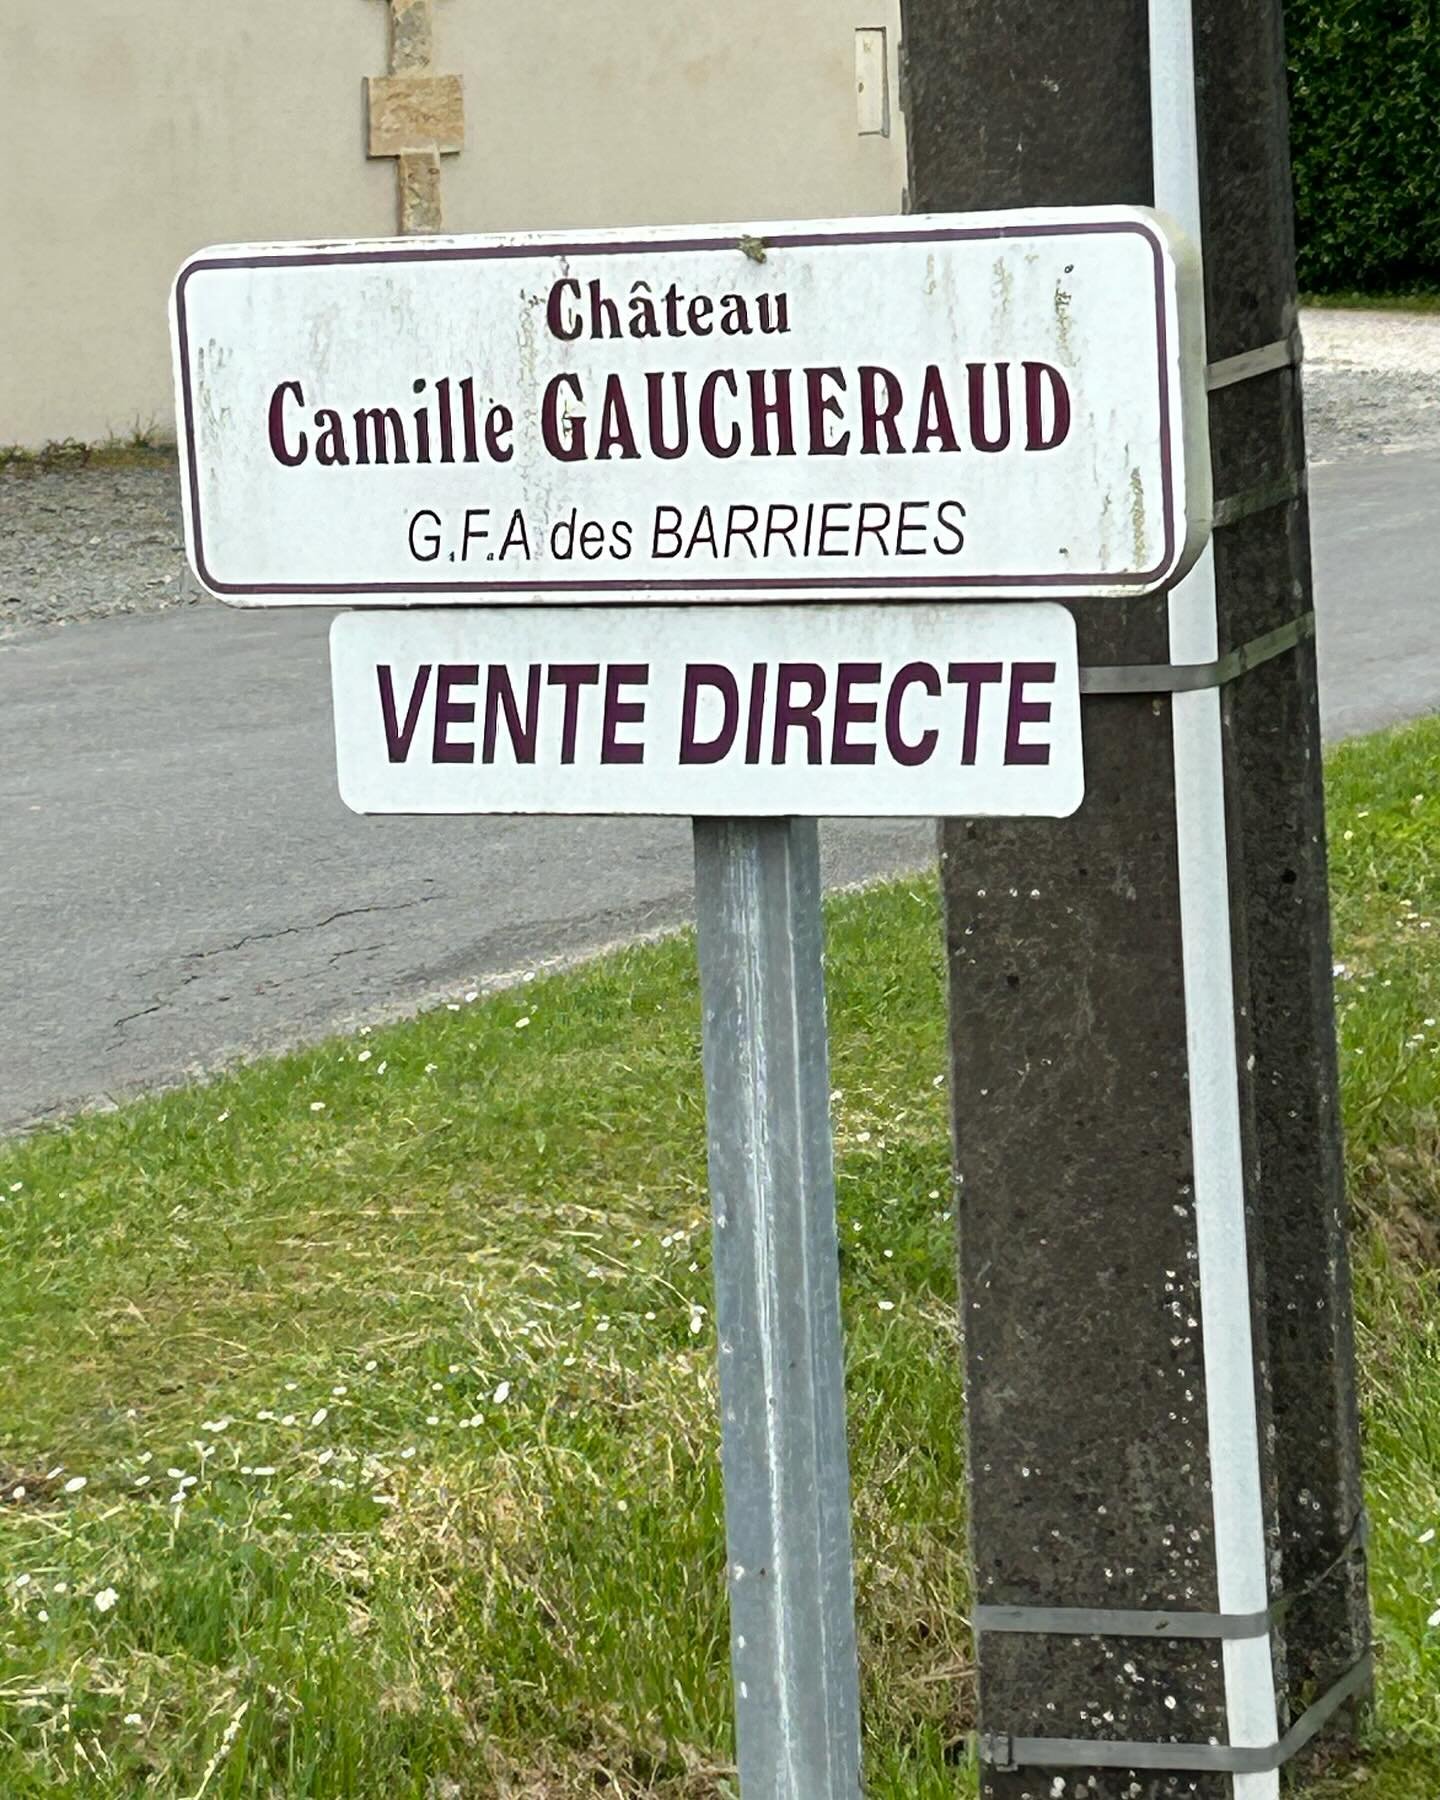 On the right bank of the Gironde River in Bordeaux is a small district called Blaye. I was honored to spend the day at Camille Gaucheraud vineyard. Stay tuned as I share some fun facts about my Blaye visit.